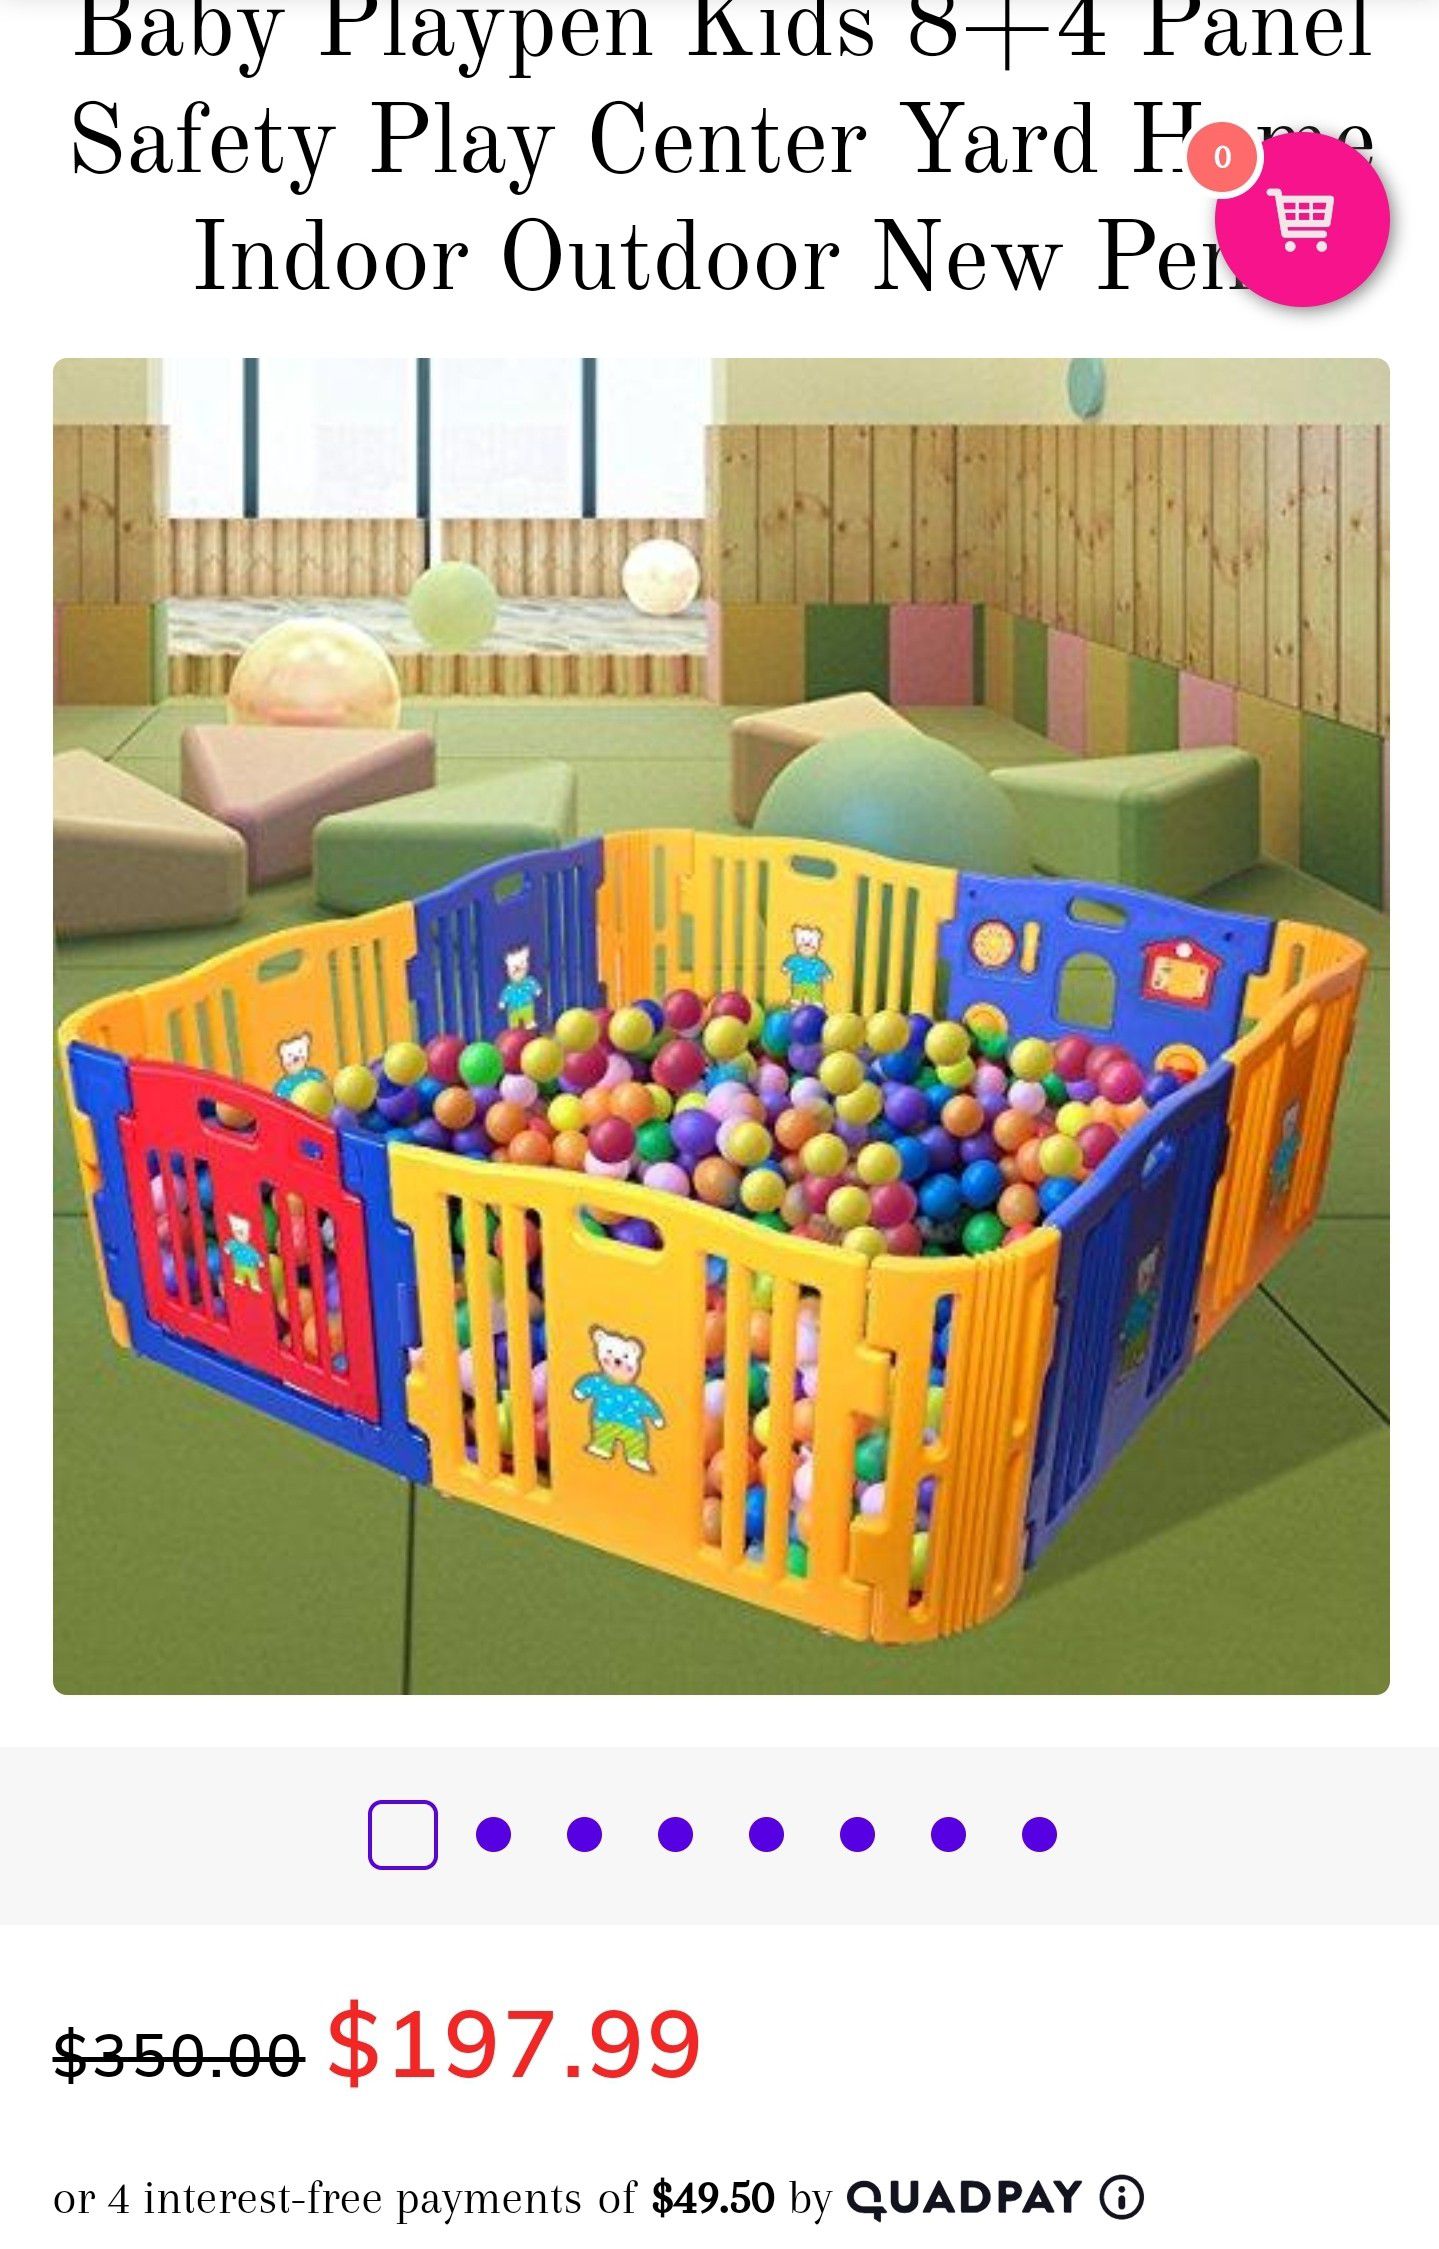 Baby Playpen panel safety play center yard